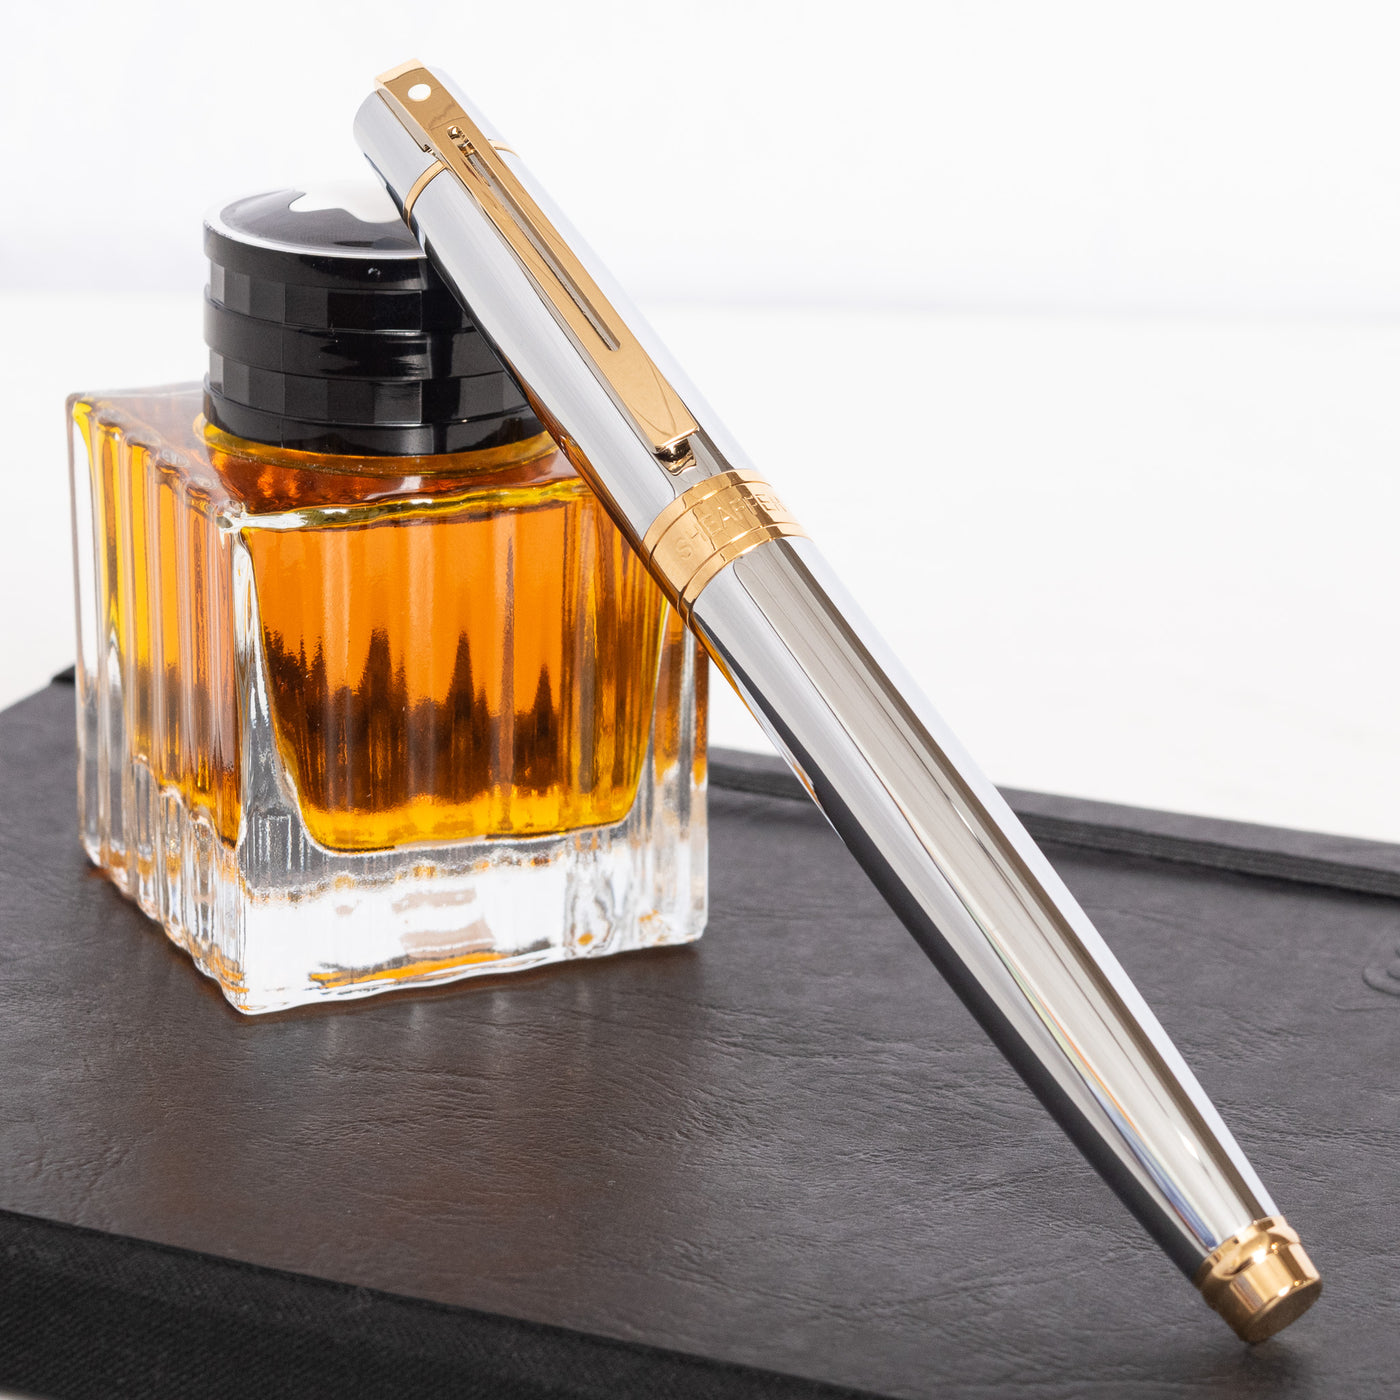 Sheaffer 300 Fountain Pen - Chrome with Gold Trim capped